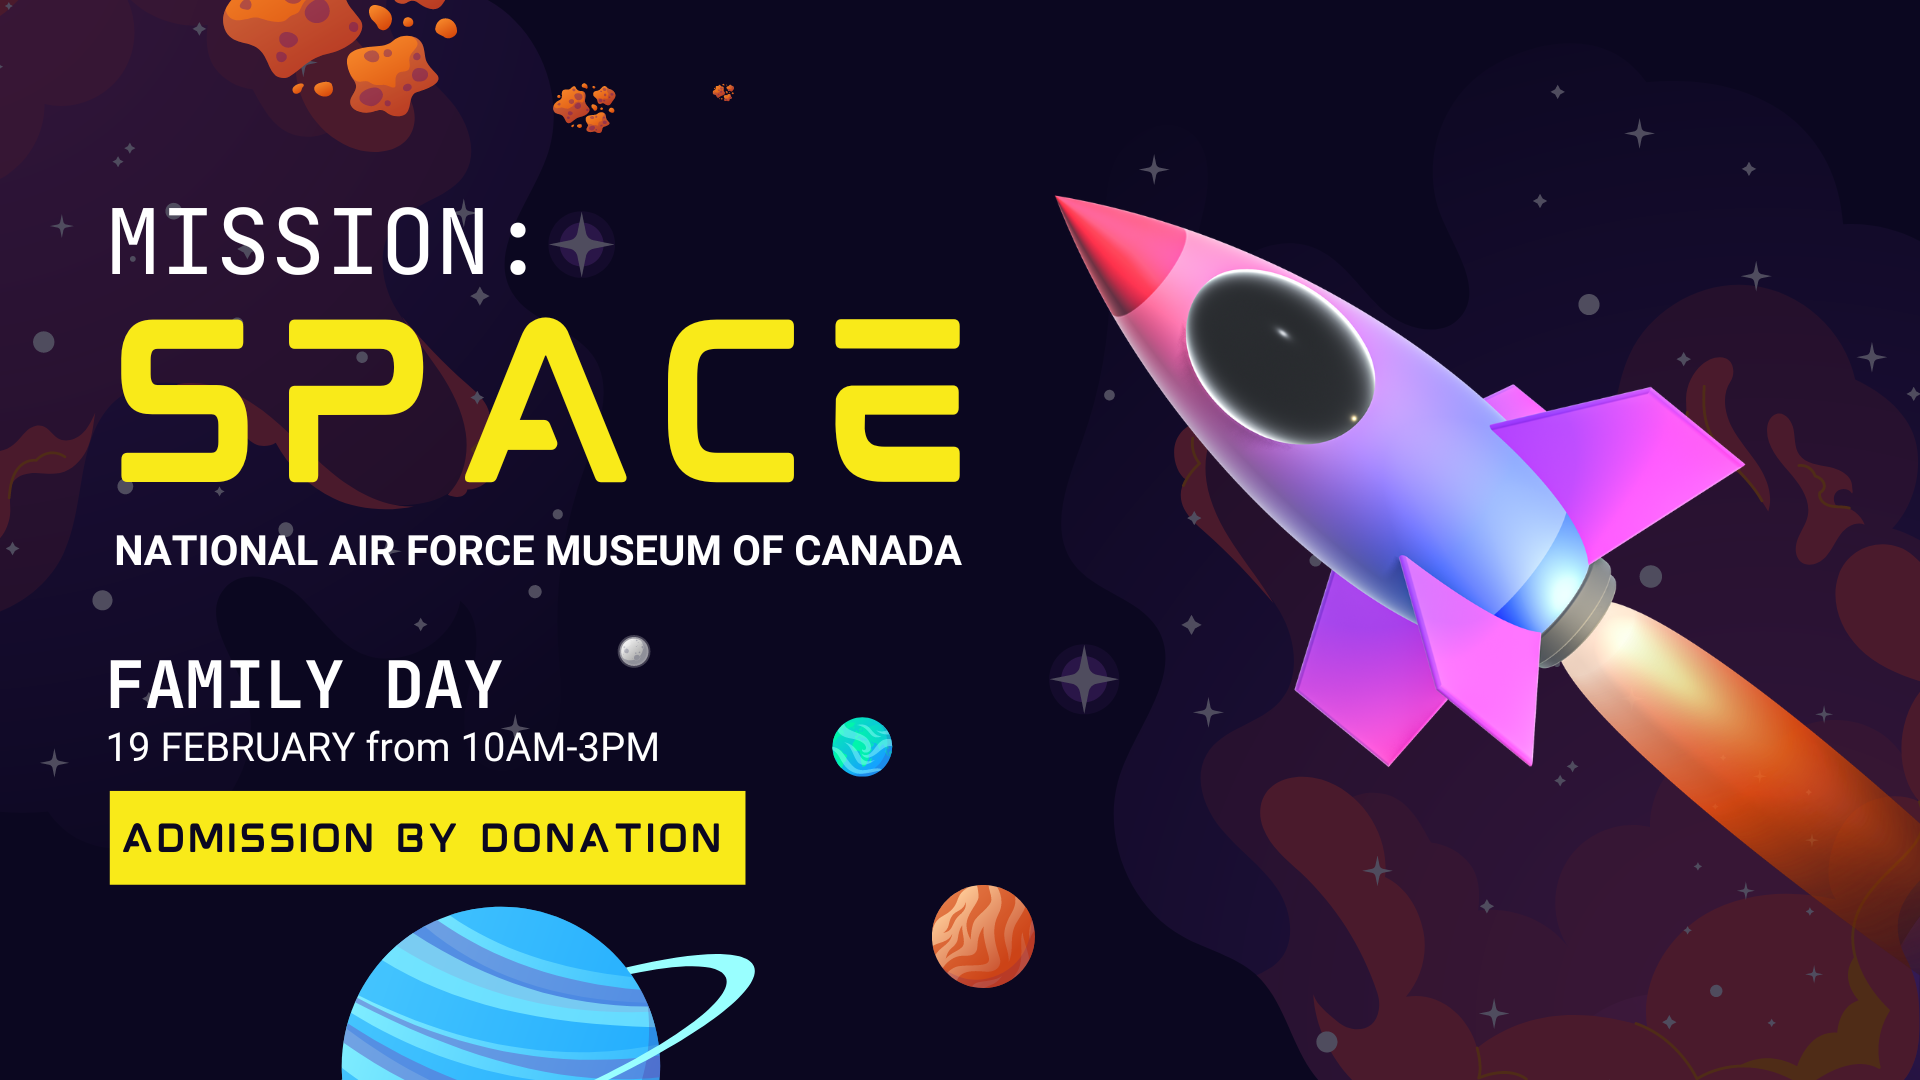 Event poster titled "Mission Space" with an image of a rocket ship taking off (animated)